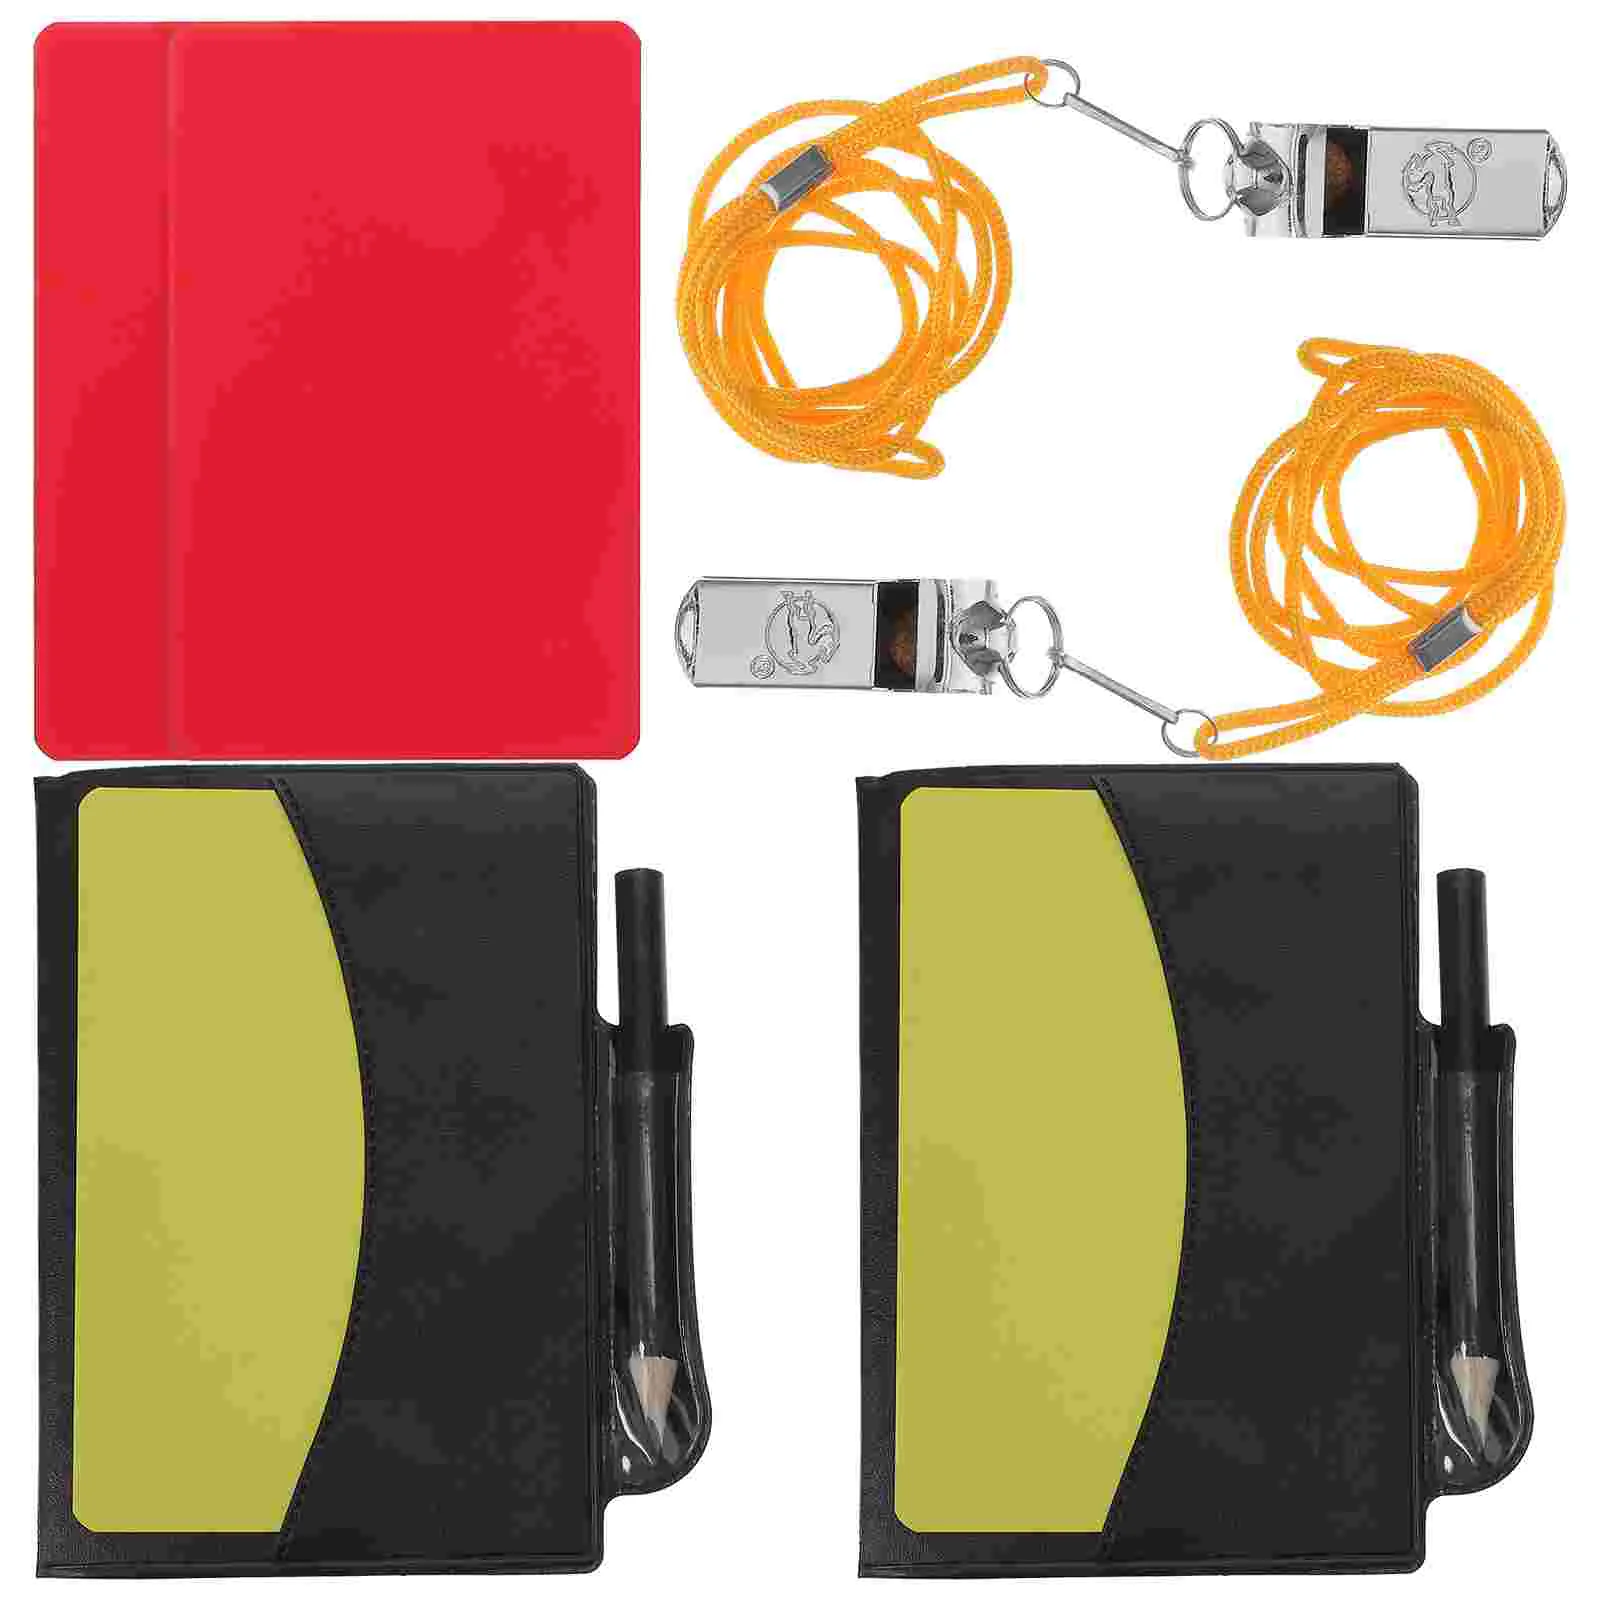 

Inoomp Metal Wallet Cards Referee Kit Red Yellow Whistle Score Pads Pencils Football Soccer Sweat Suit